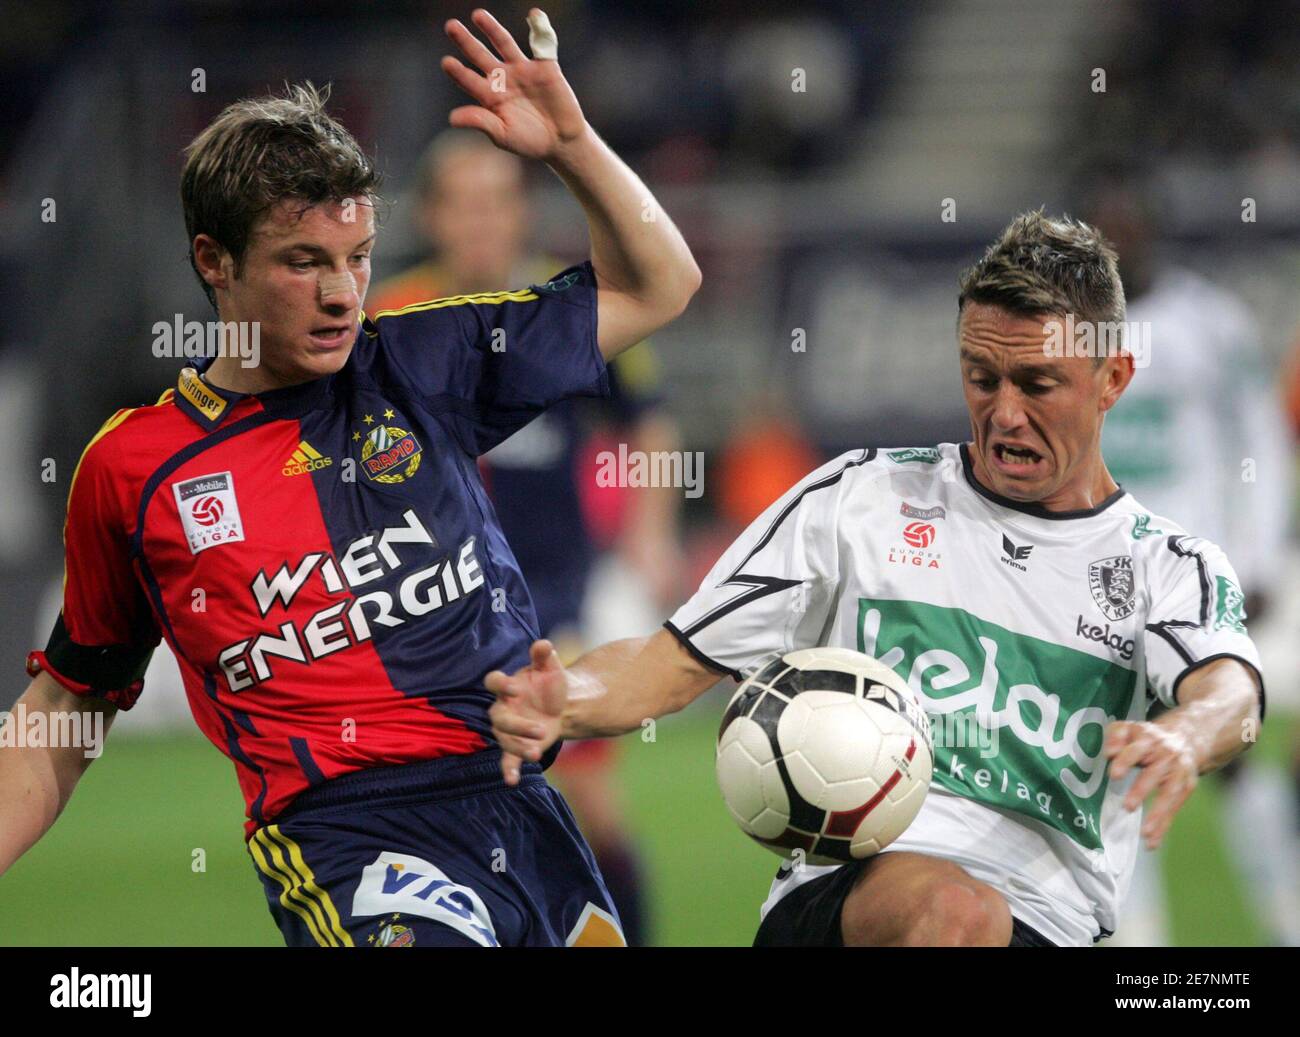 Austria Carinthia's Peter Kabat (R) and Rapid Vienna's Hannes Eder (L) go  for the ball during their Austrian soccer league match in Klagenfurt  October 7, 2007. REUTERS/Daniel Raunig (AUSTRIA Stock Photo - Alamy